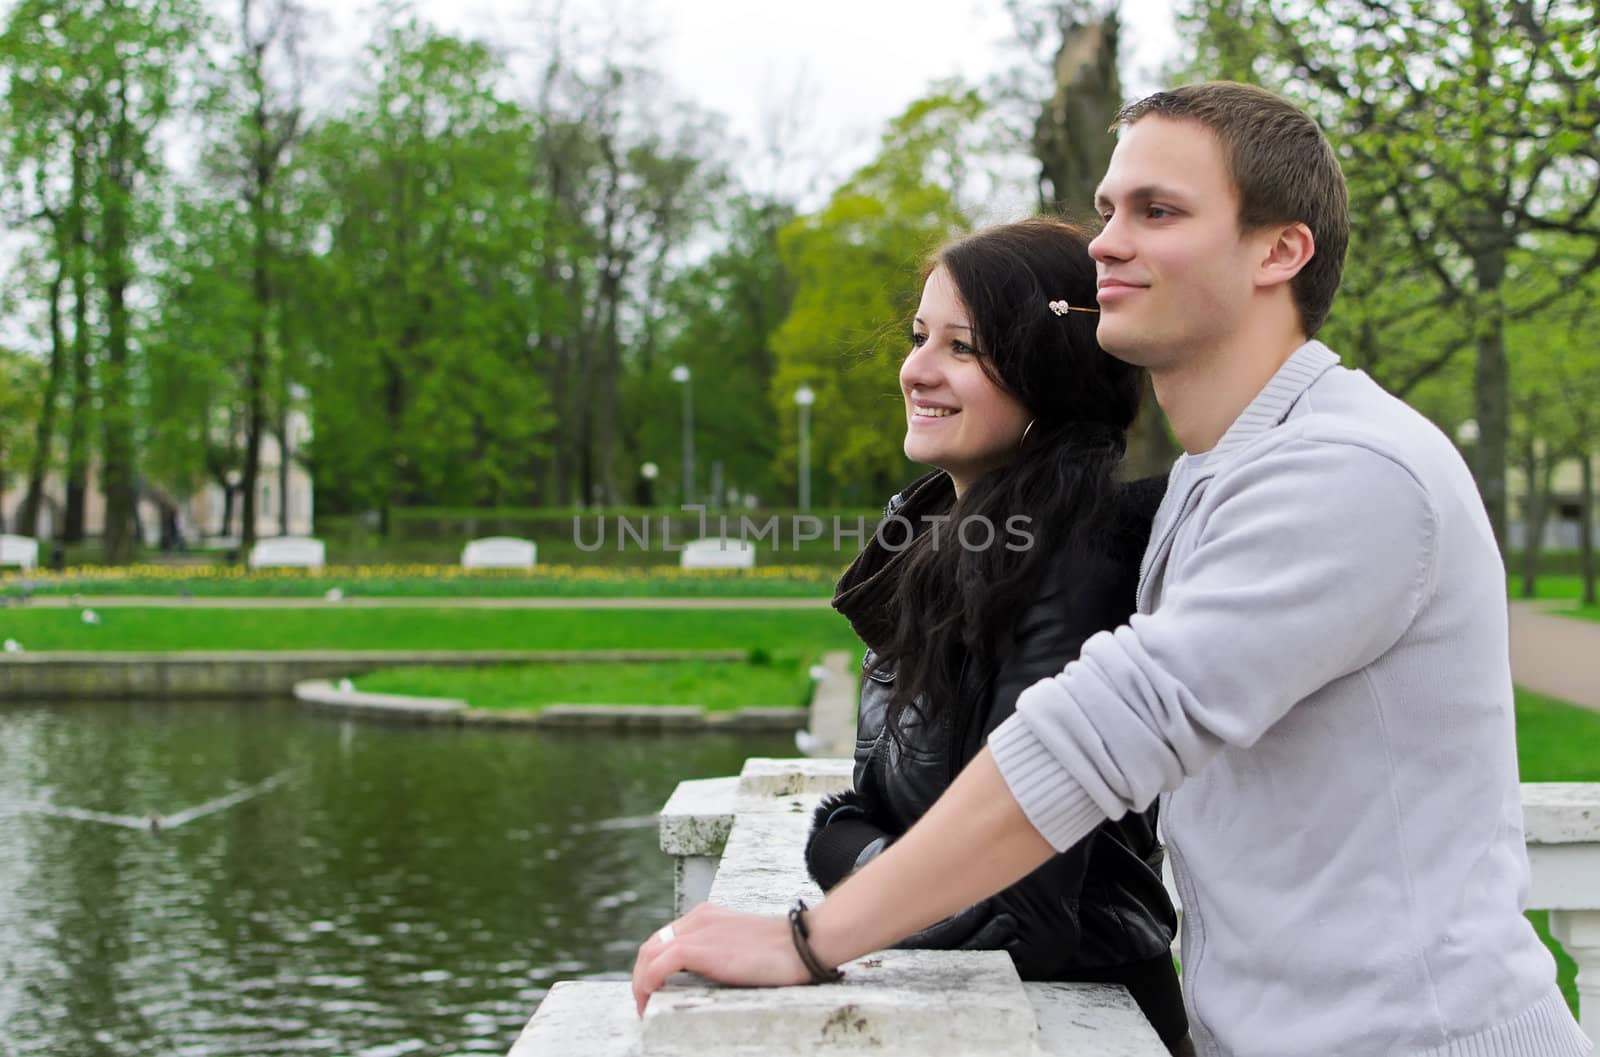 Cute couple looking at a pond in the park